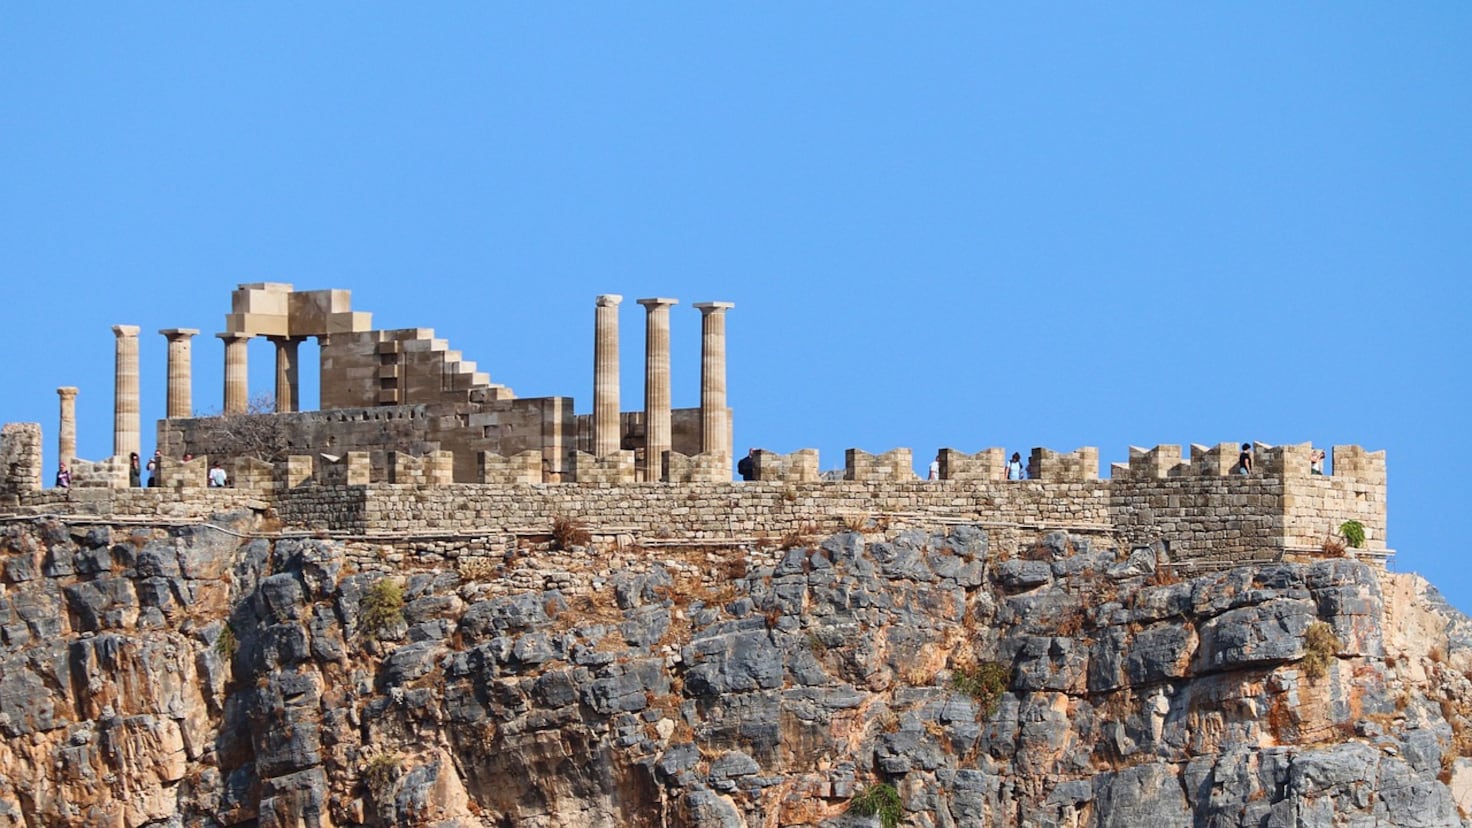 The Acropolis of Athens closes due to heat